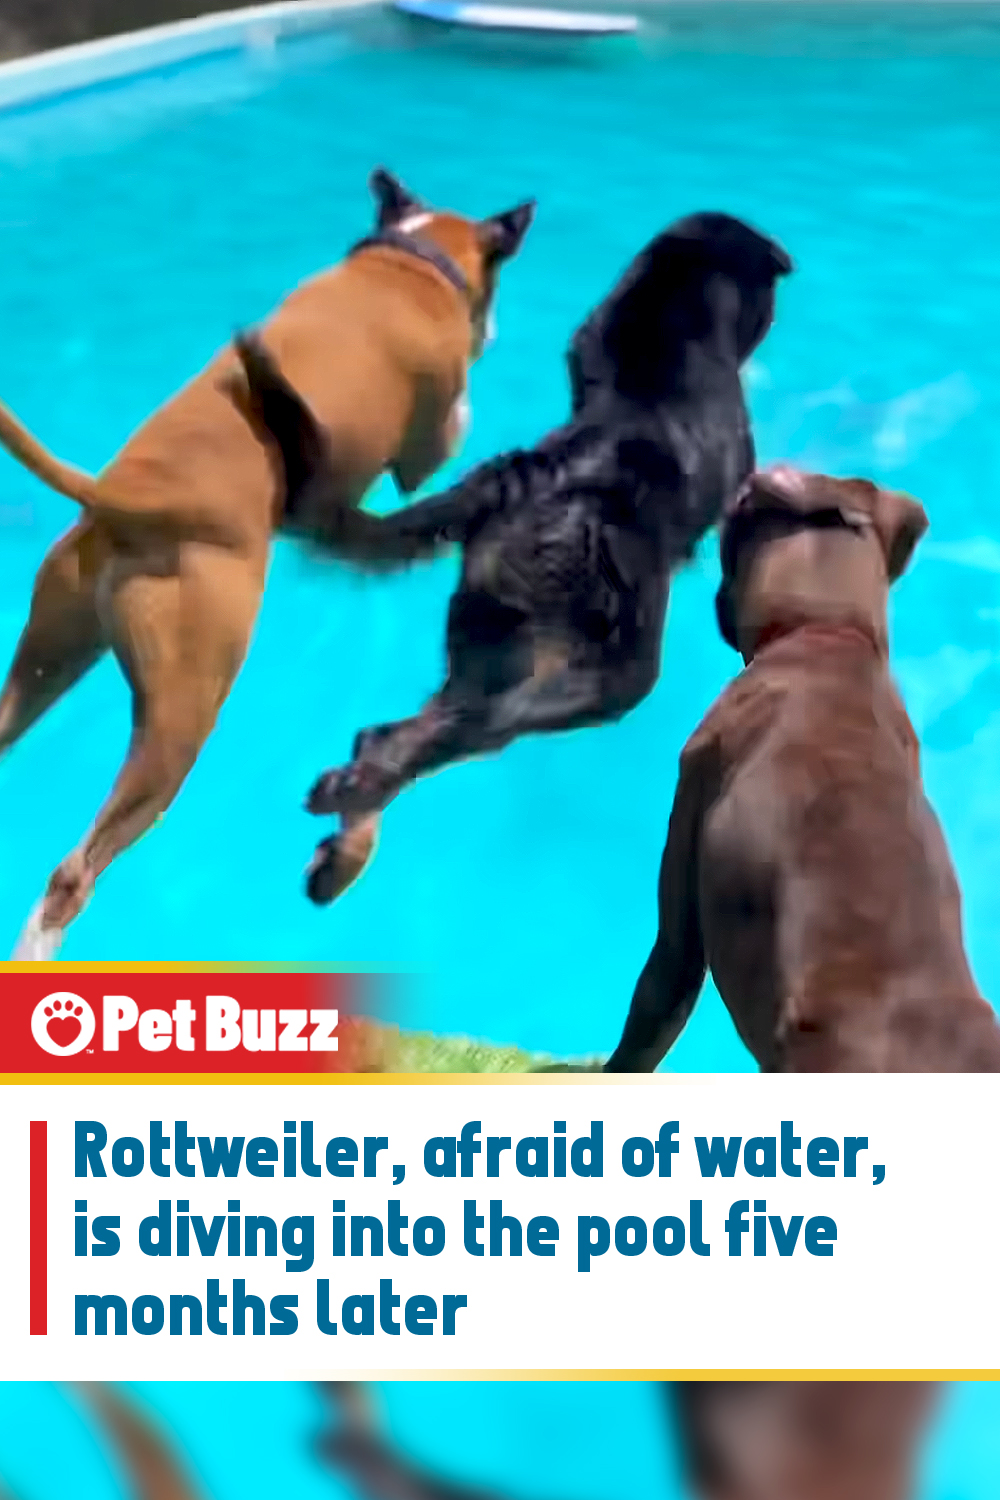 Rottweiler, afraid of water, is diving into the pool five months later